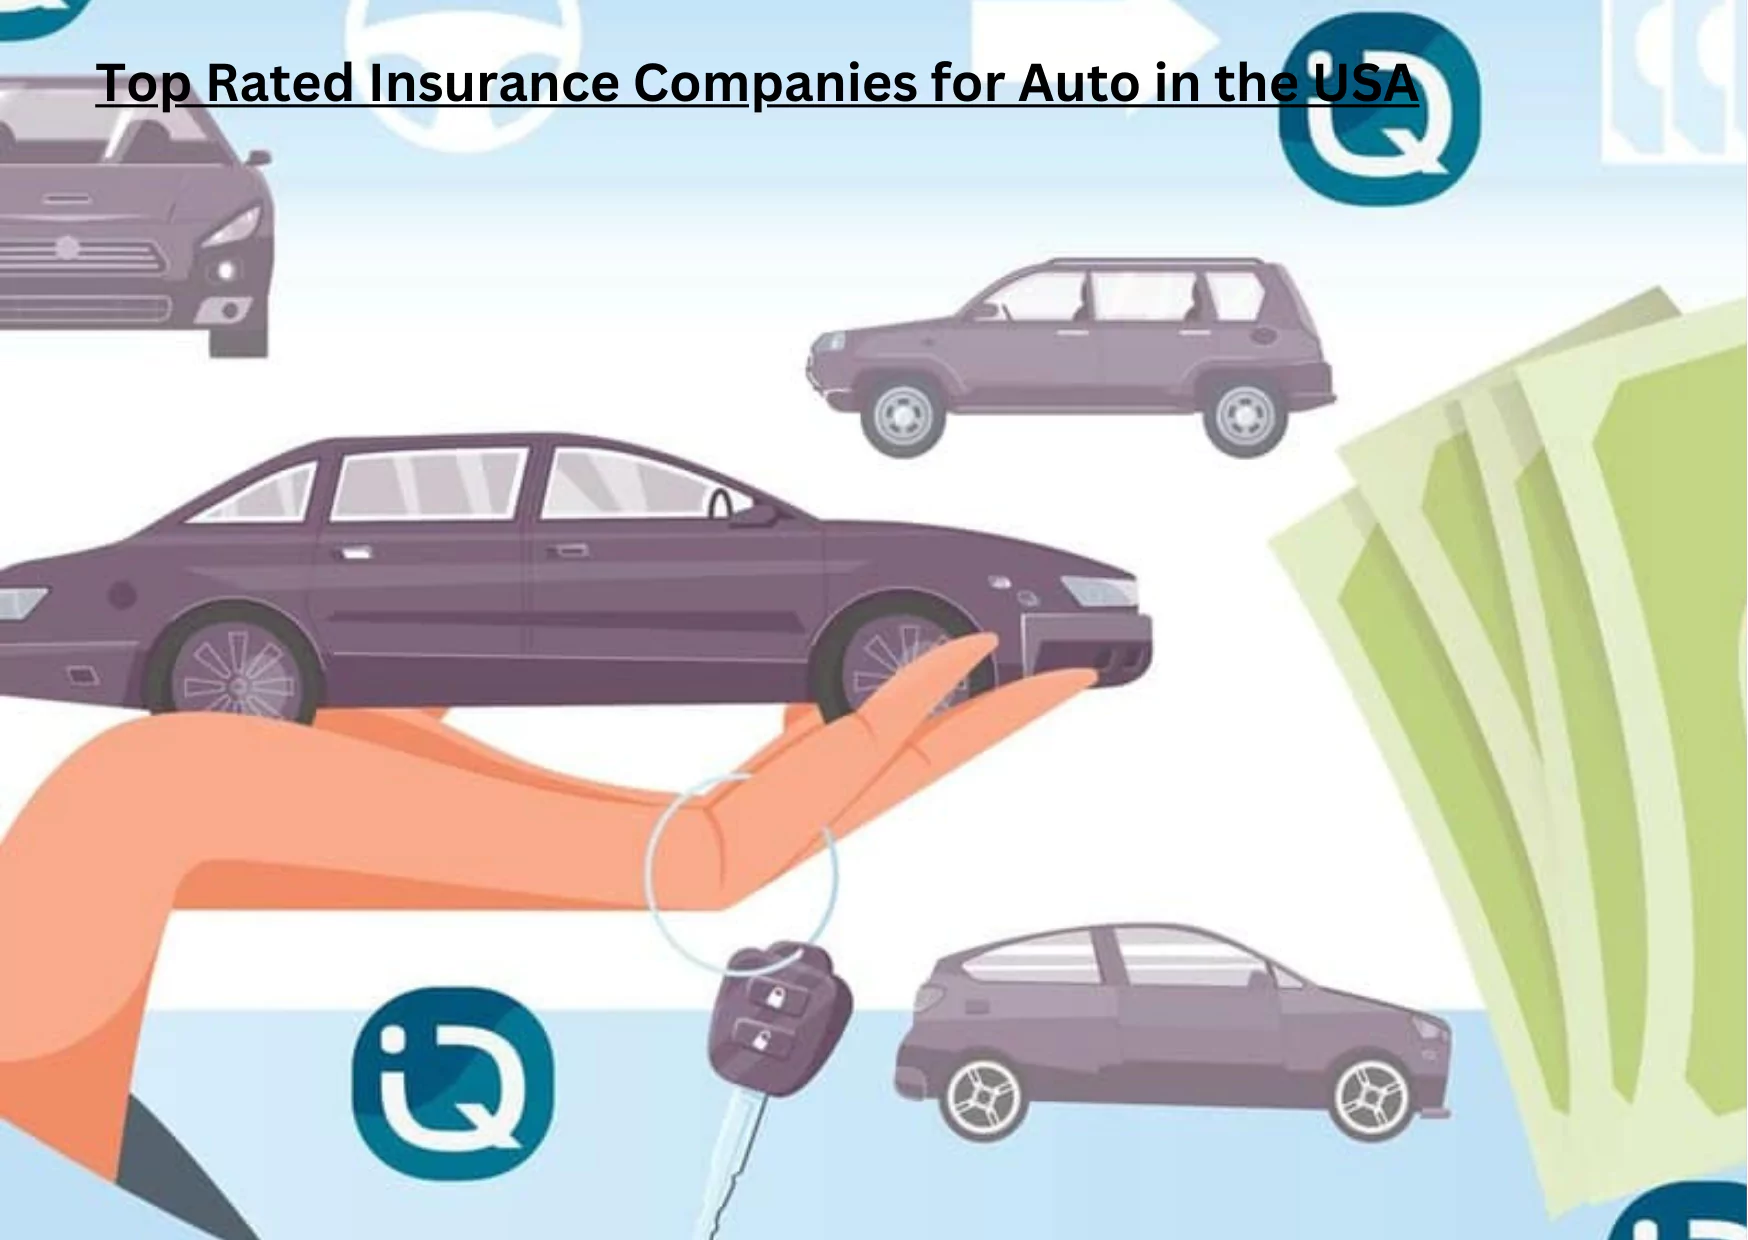 Top Rated Insurance Companies for Auto in the USA